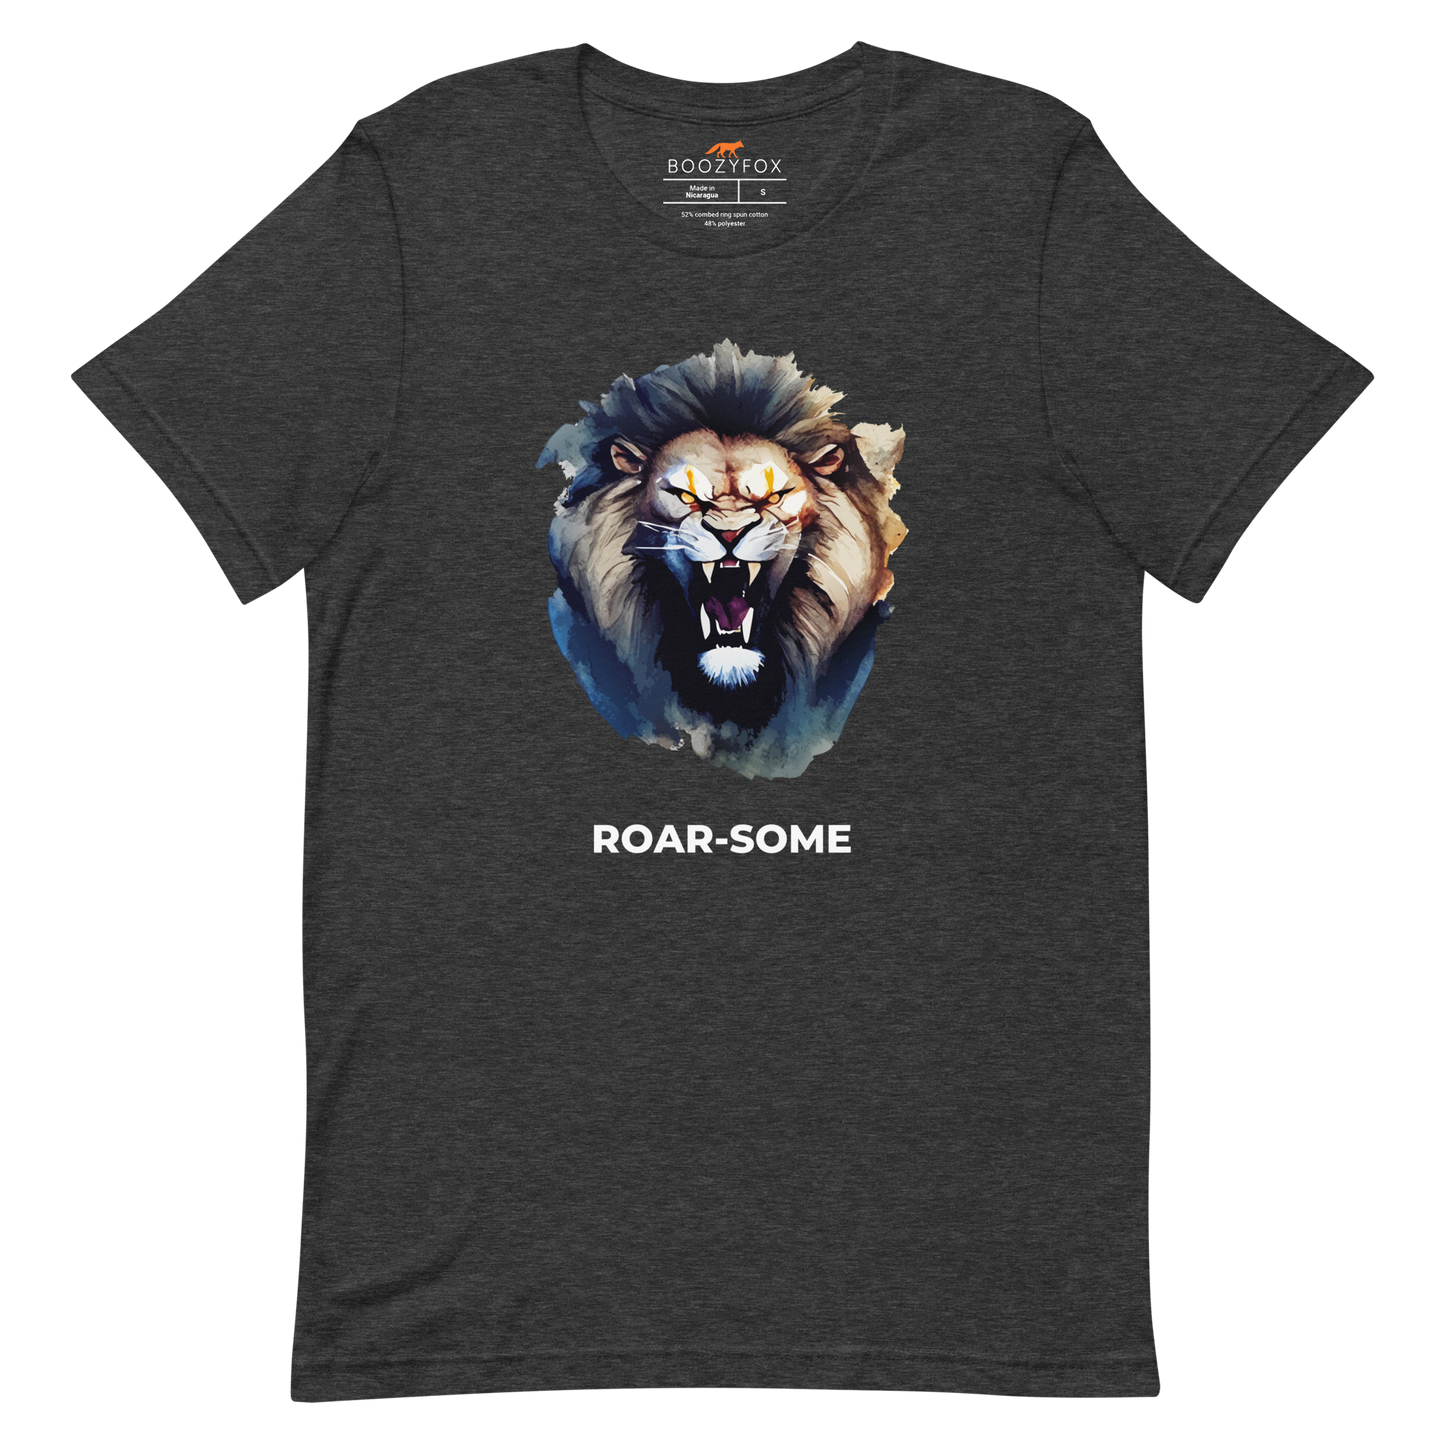 Dark Grey Heather Premium Lion Tee featuring a Roar-Some graphic on the chest - Cool Graphic Lion Tees - Boozy Fox